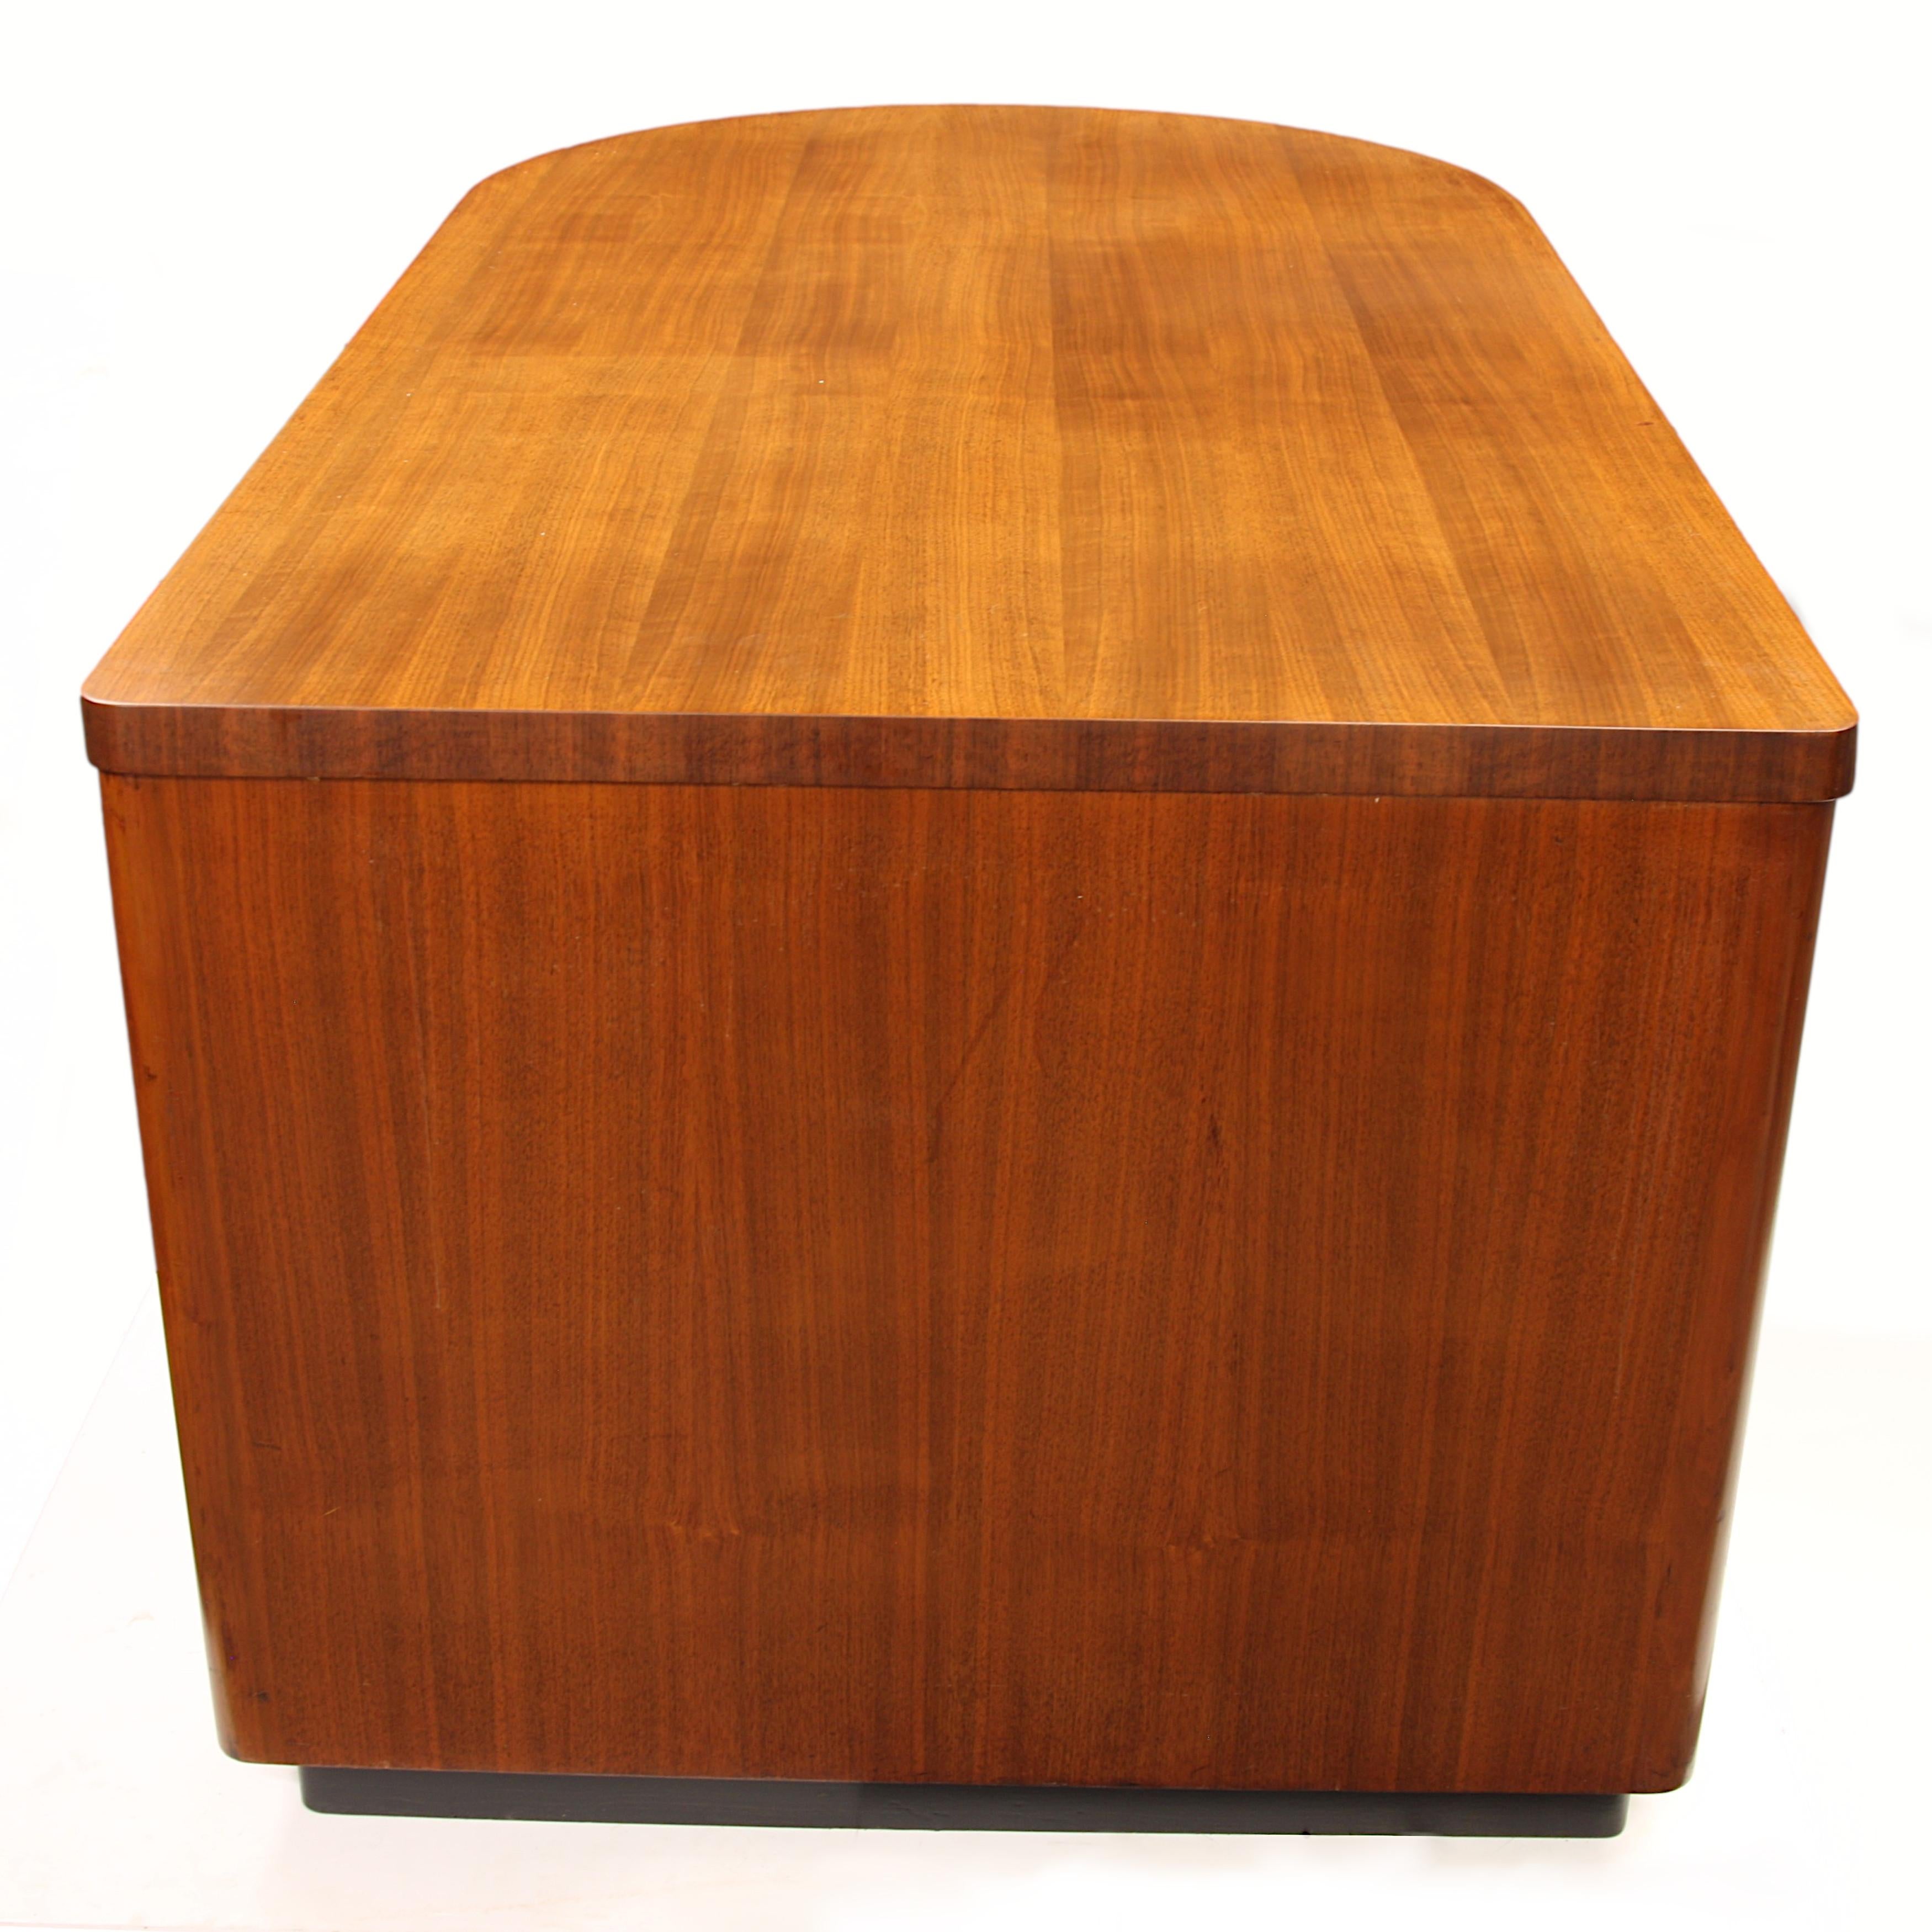 American Rare 1950s Mid-Century Modern Art Deco Inspired Walnut Rounded Top Desk For Sale